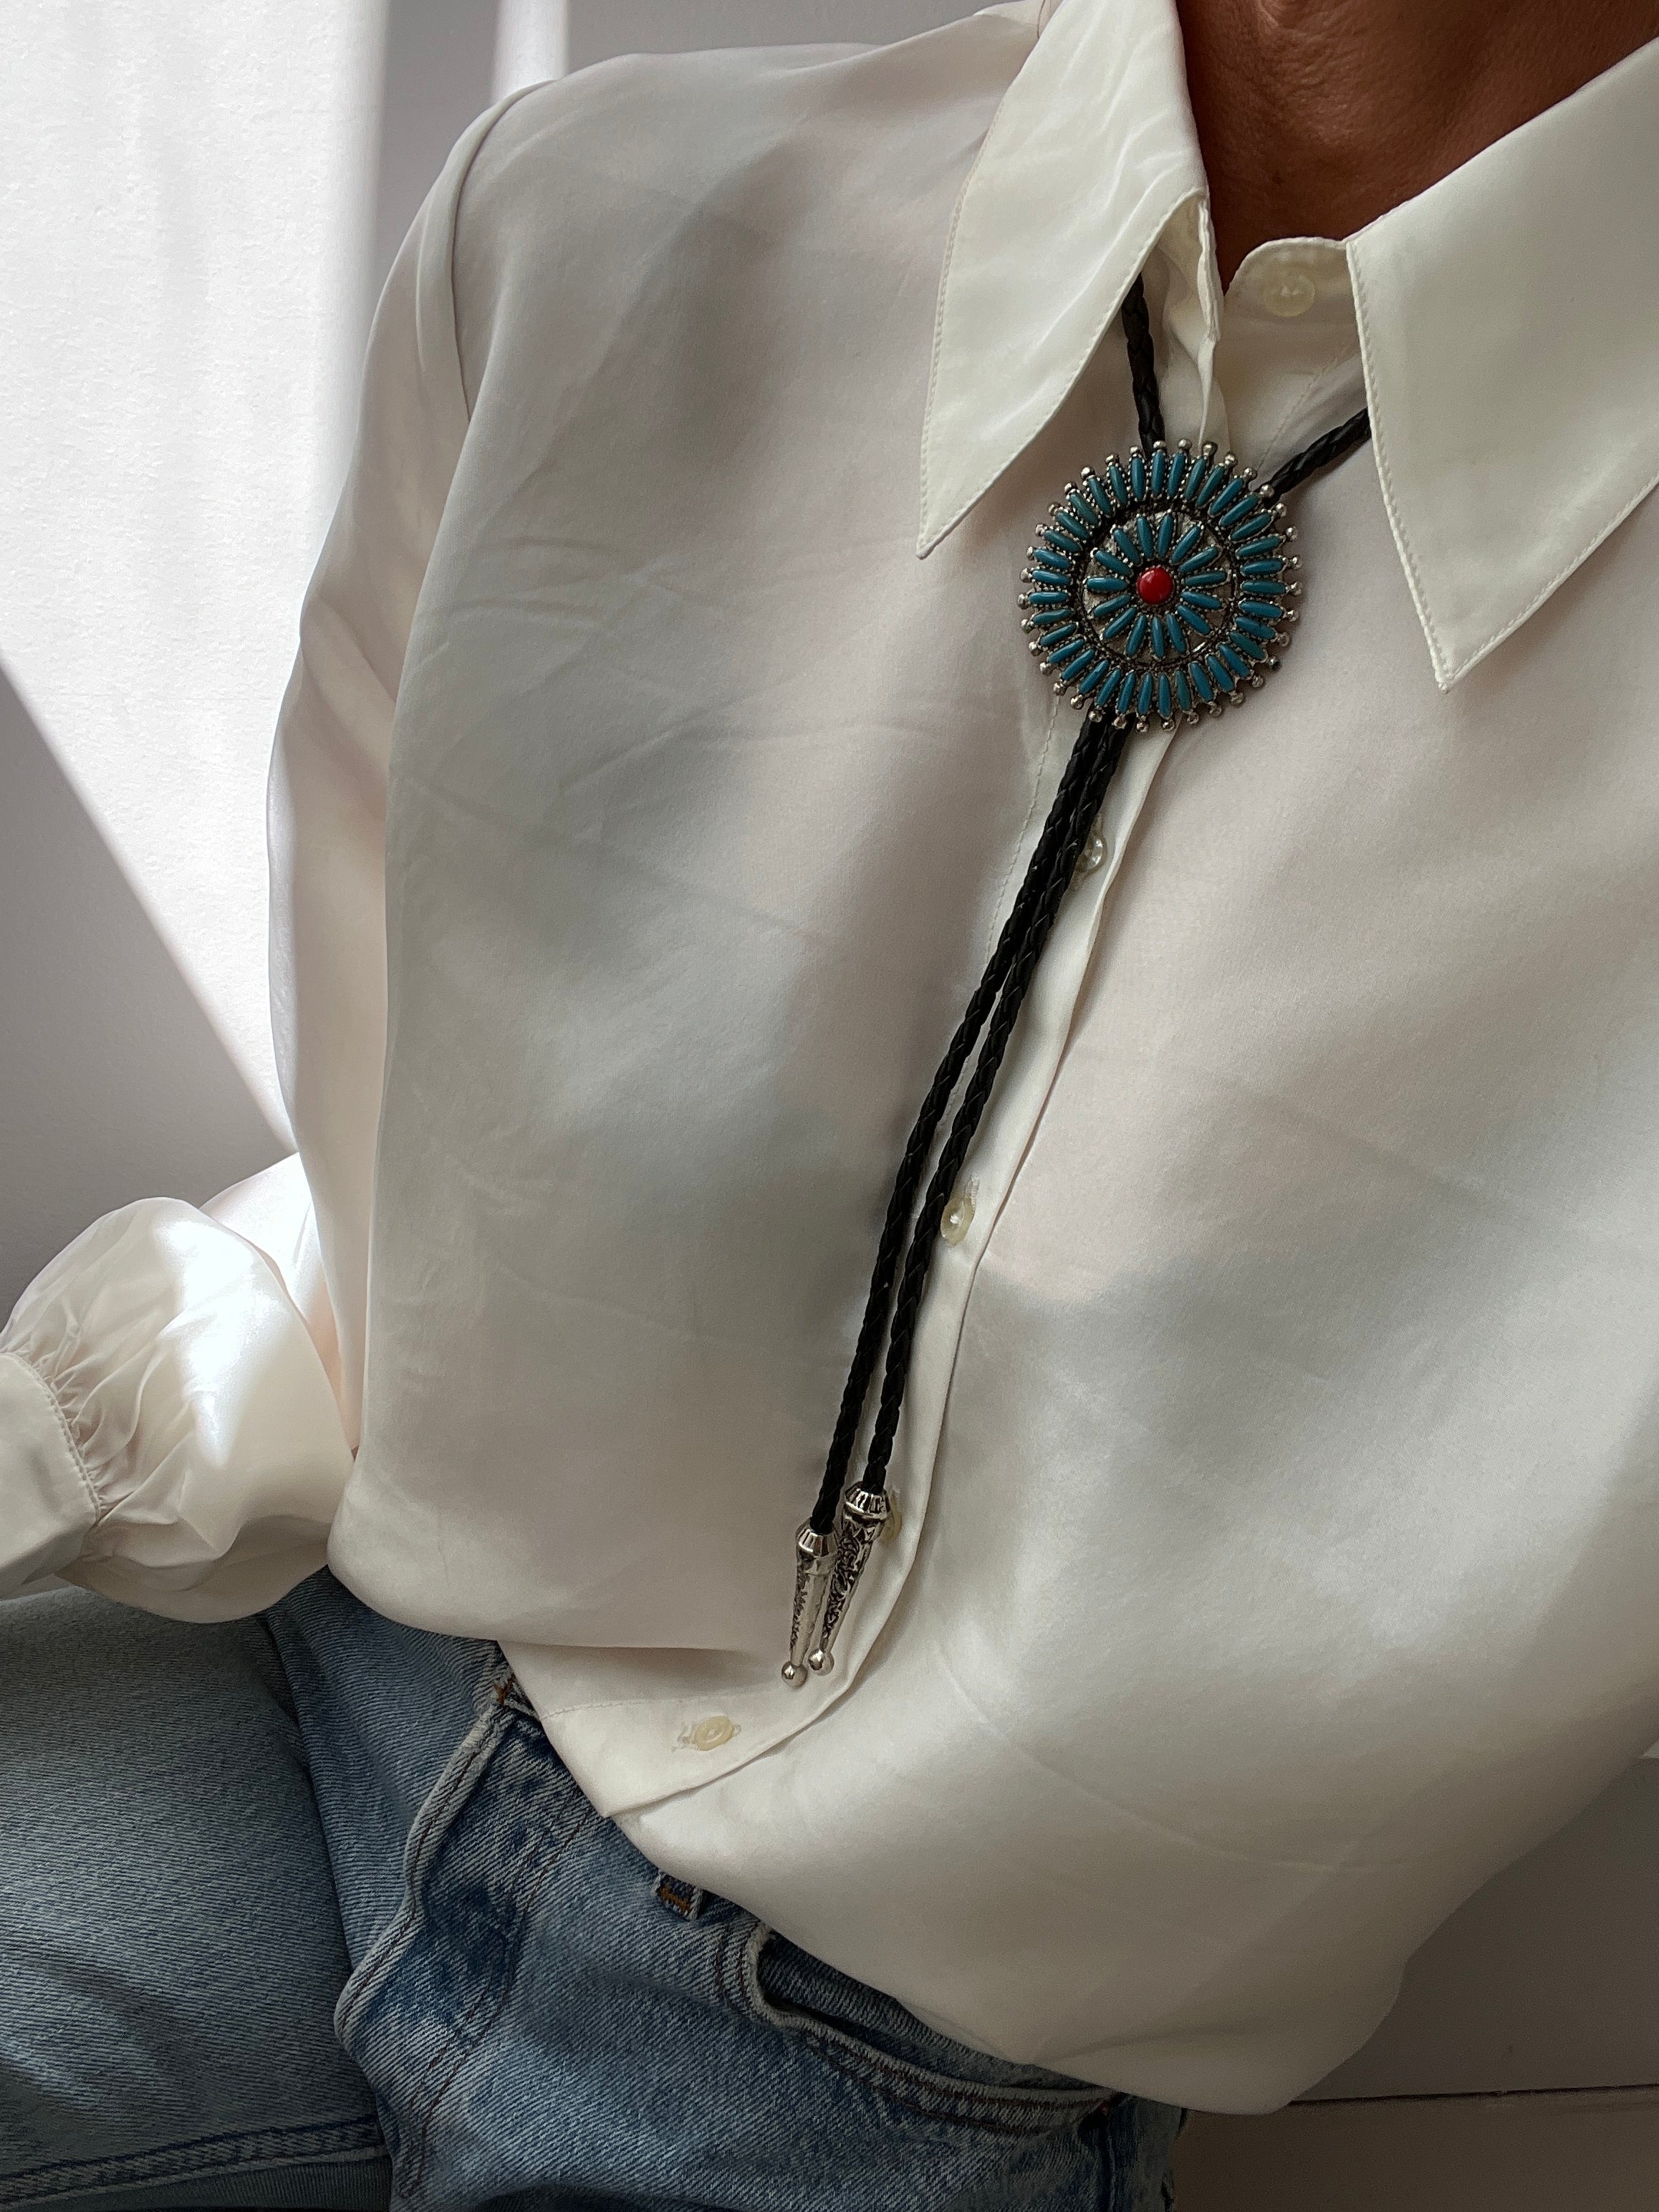 Not specified Necklaces torquoise Bolo Tie Round